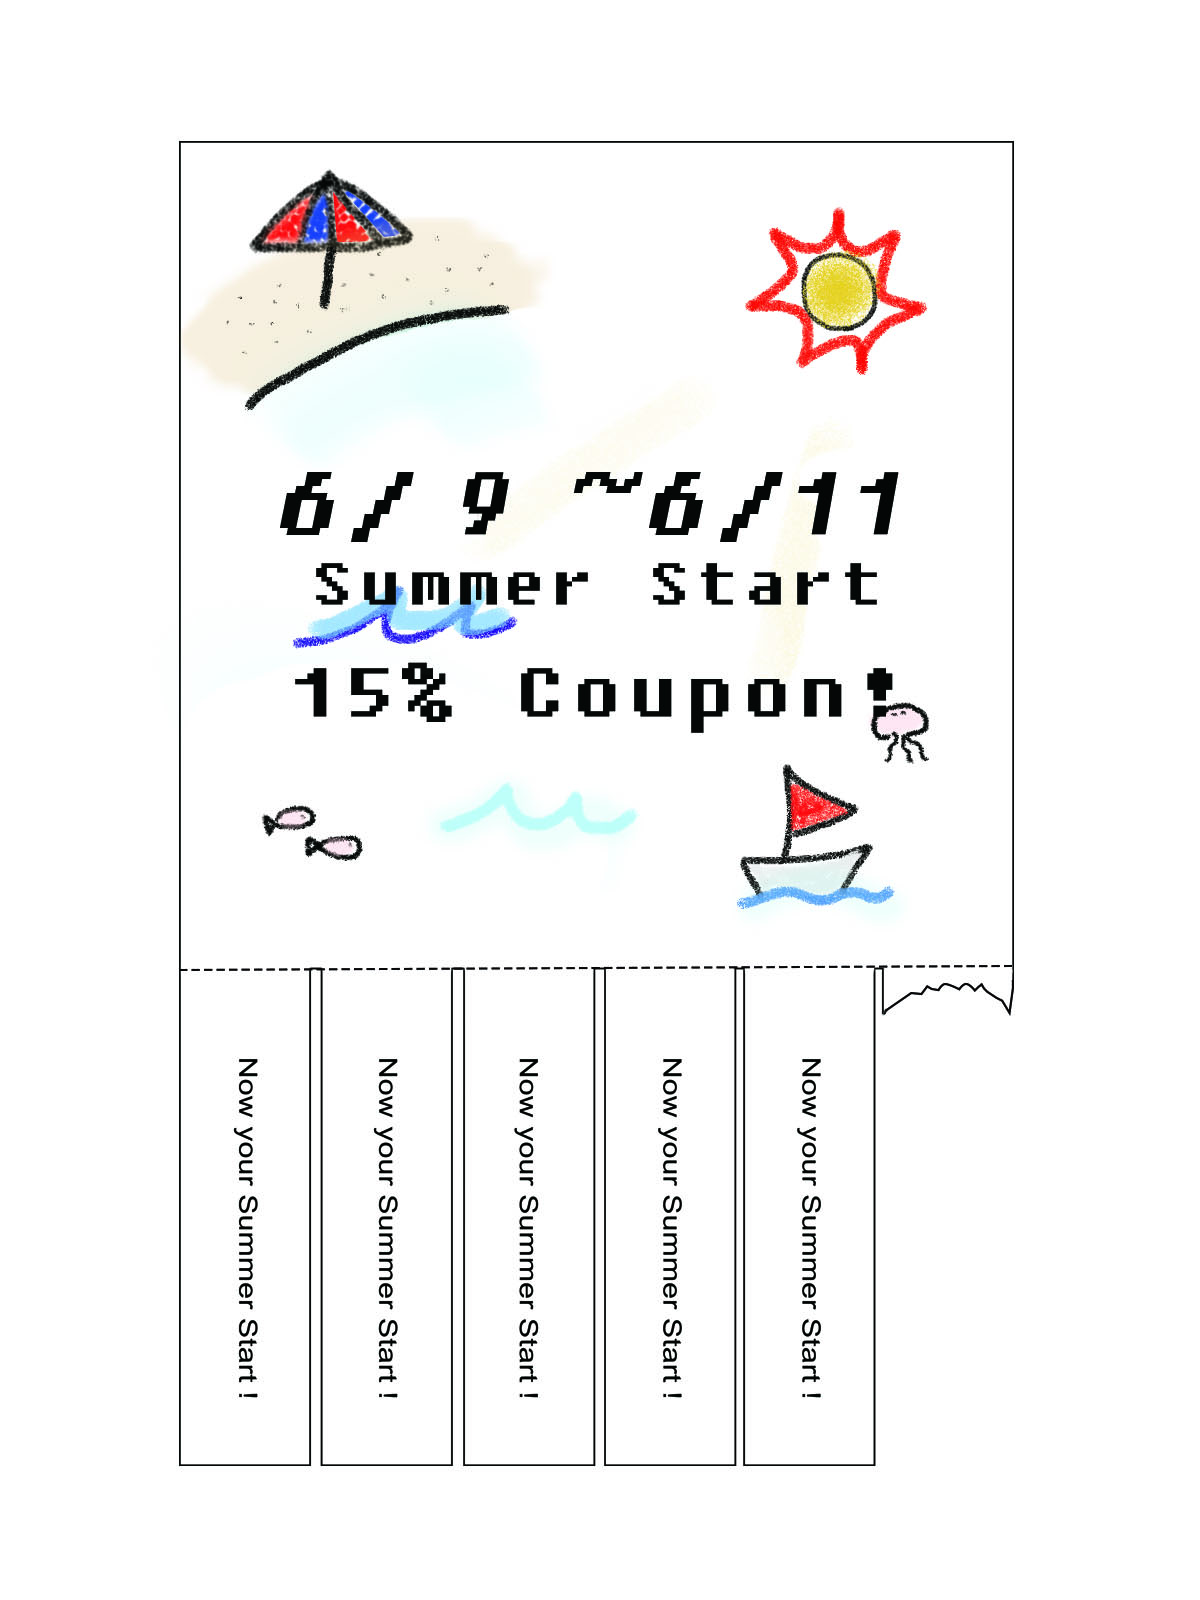 For 3 days, Summer Start 15% coupon